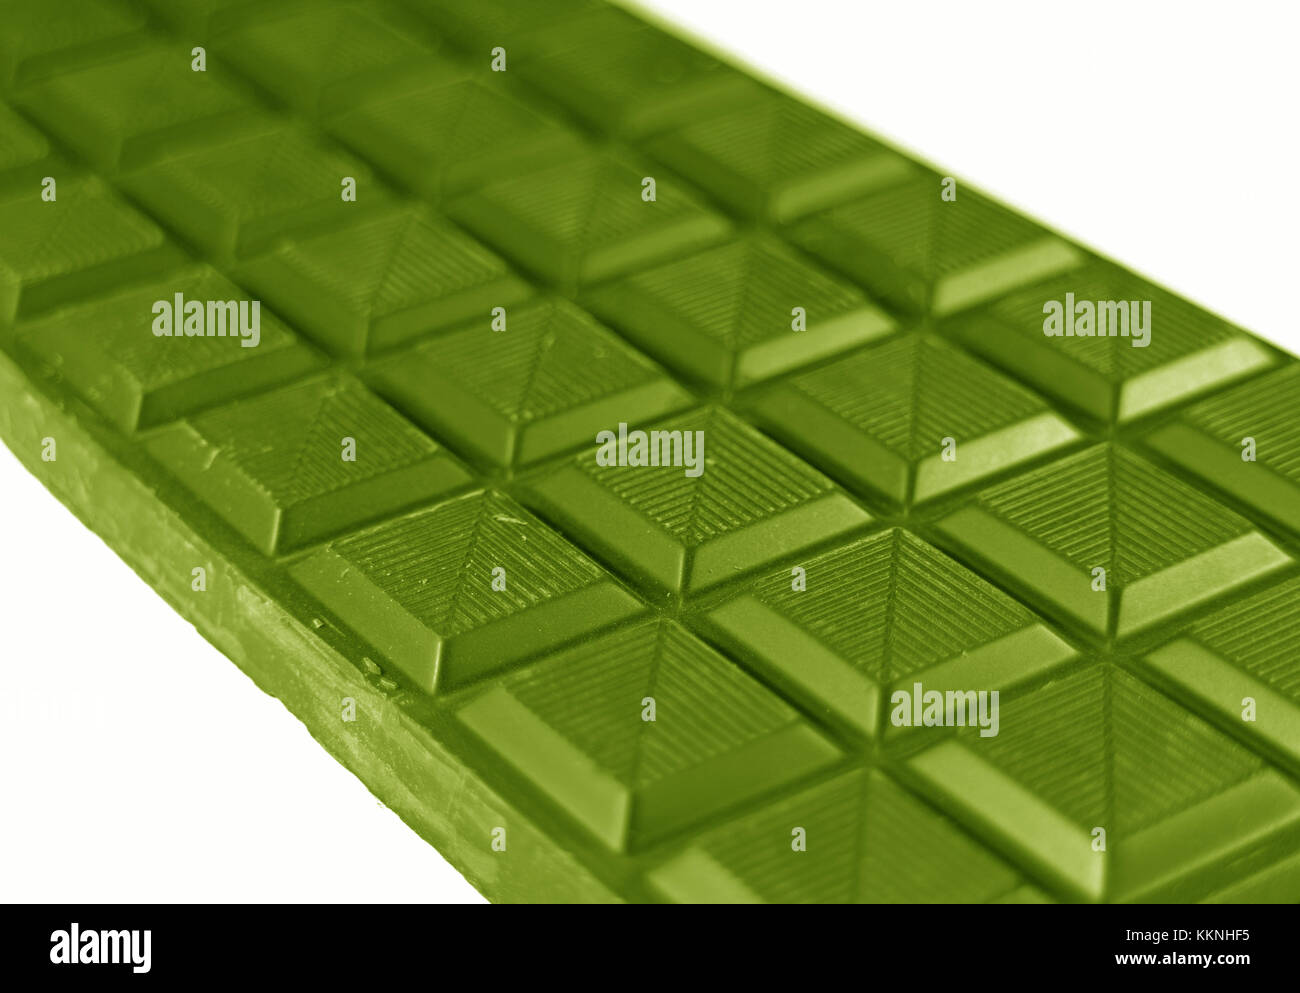 Closed up chocolate bar in olive green color on white background with selective focus Stock Photo